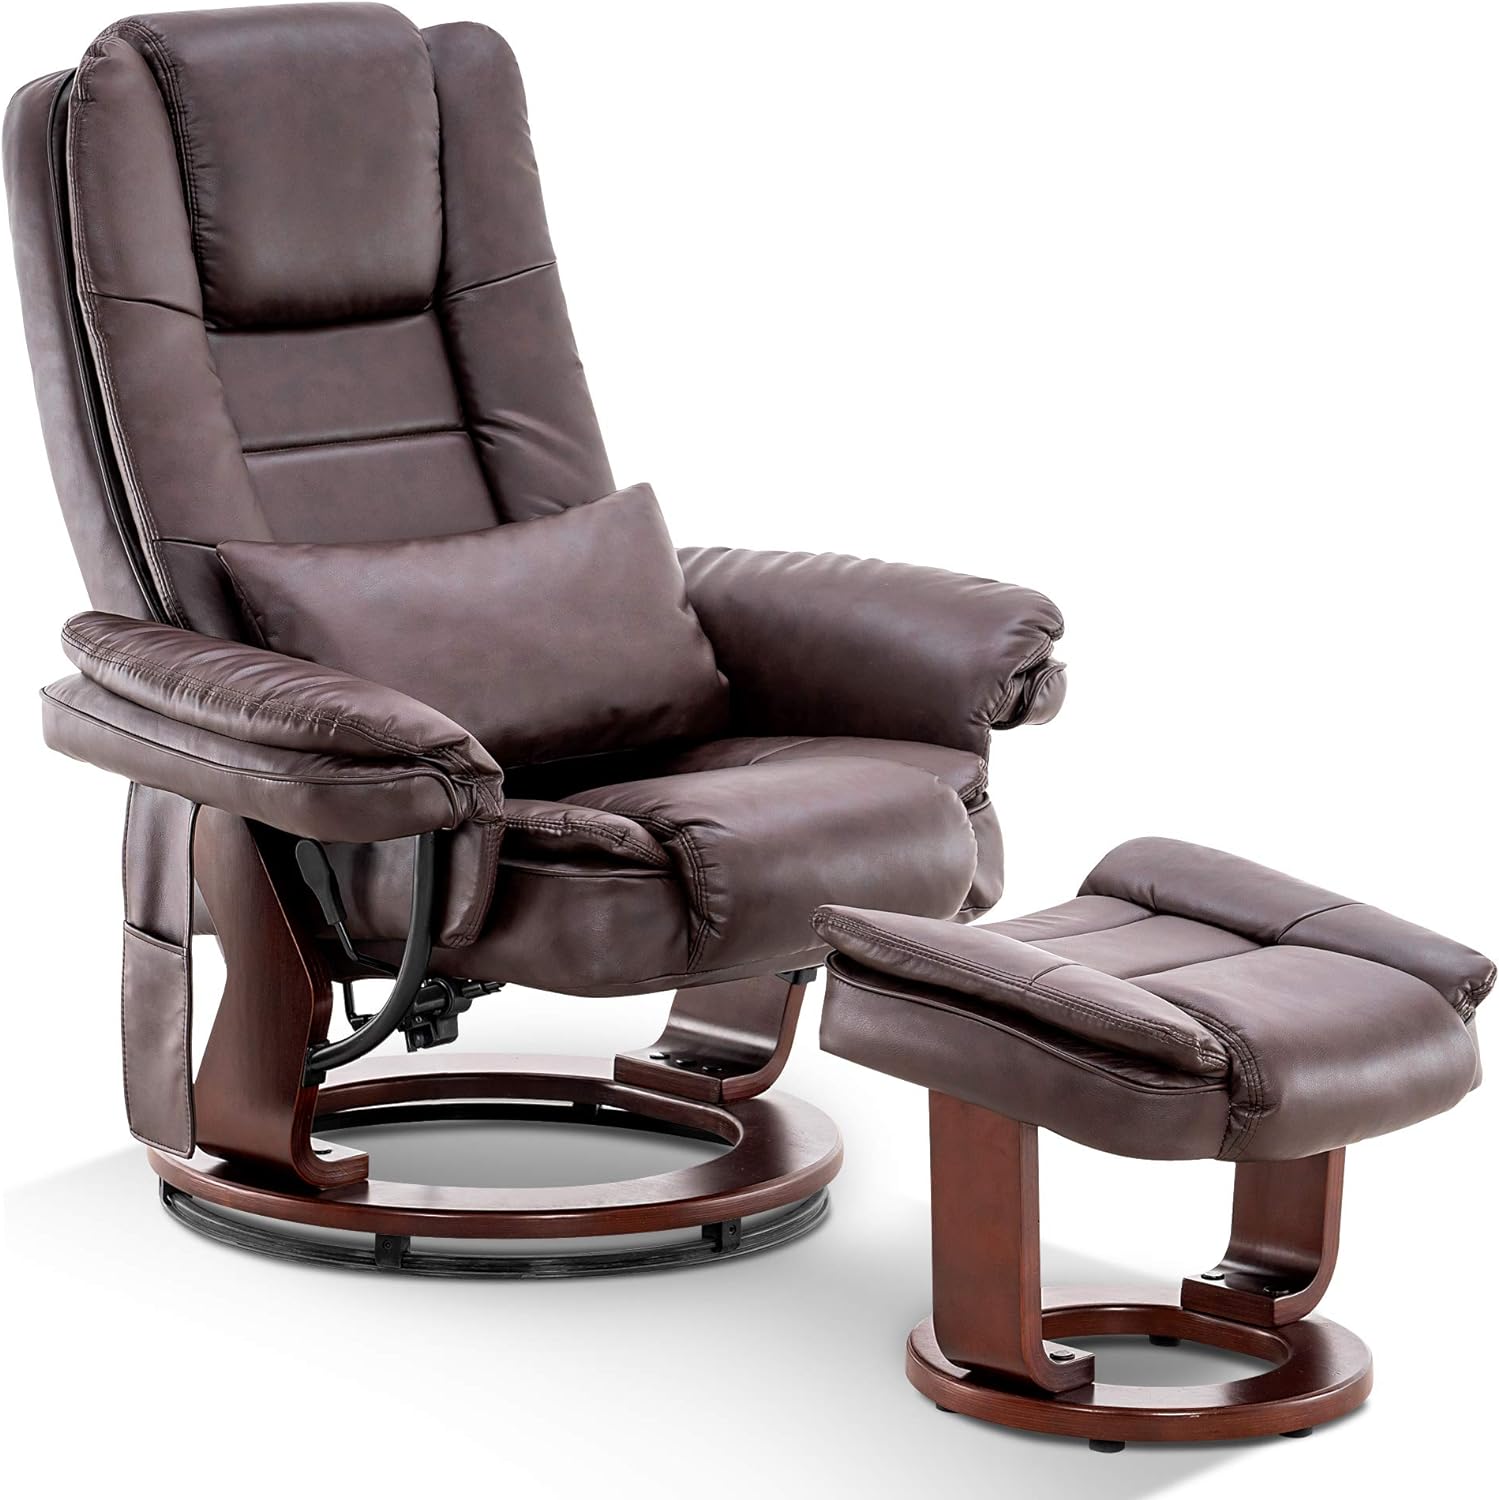 Mcombo Recliner With Ottoman, Leather Reclining Chair And Ottoman